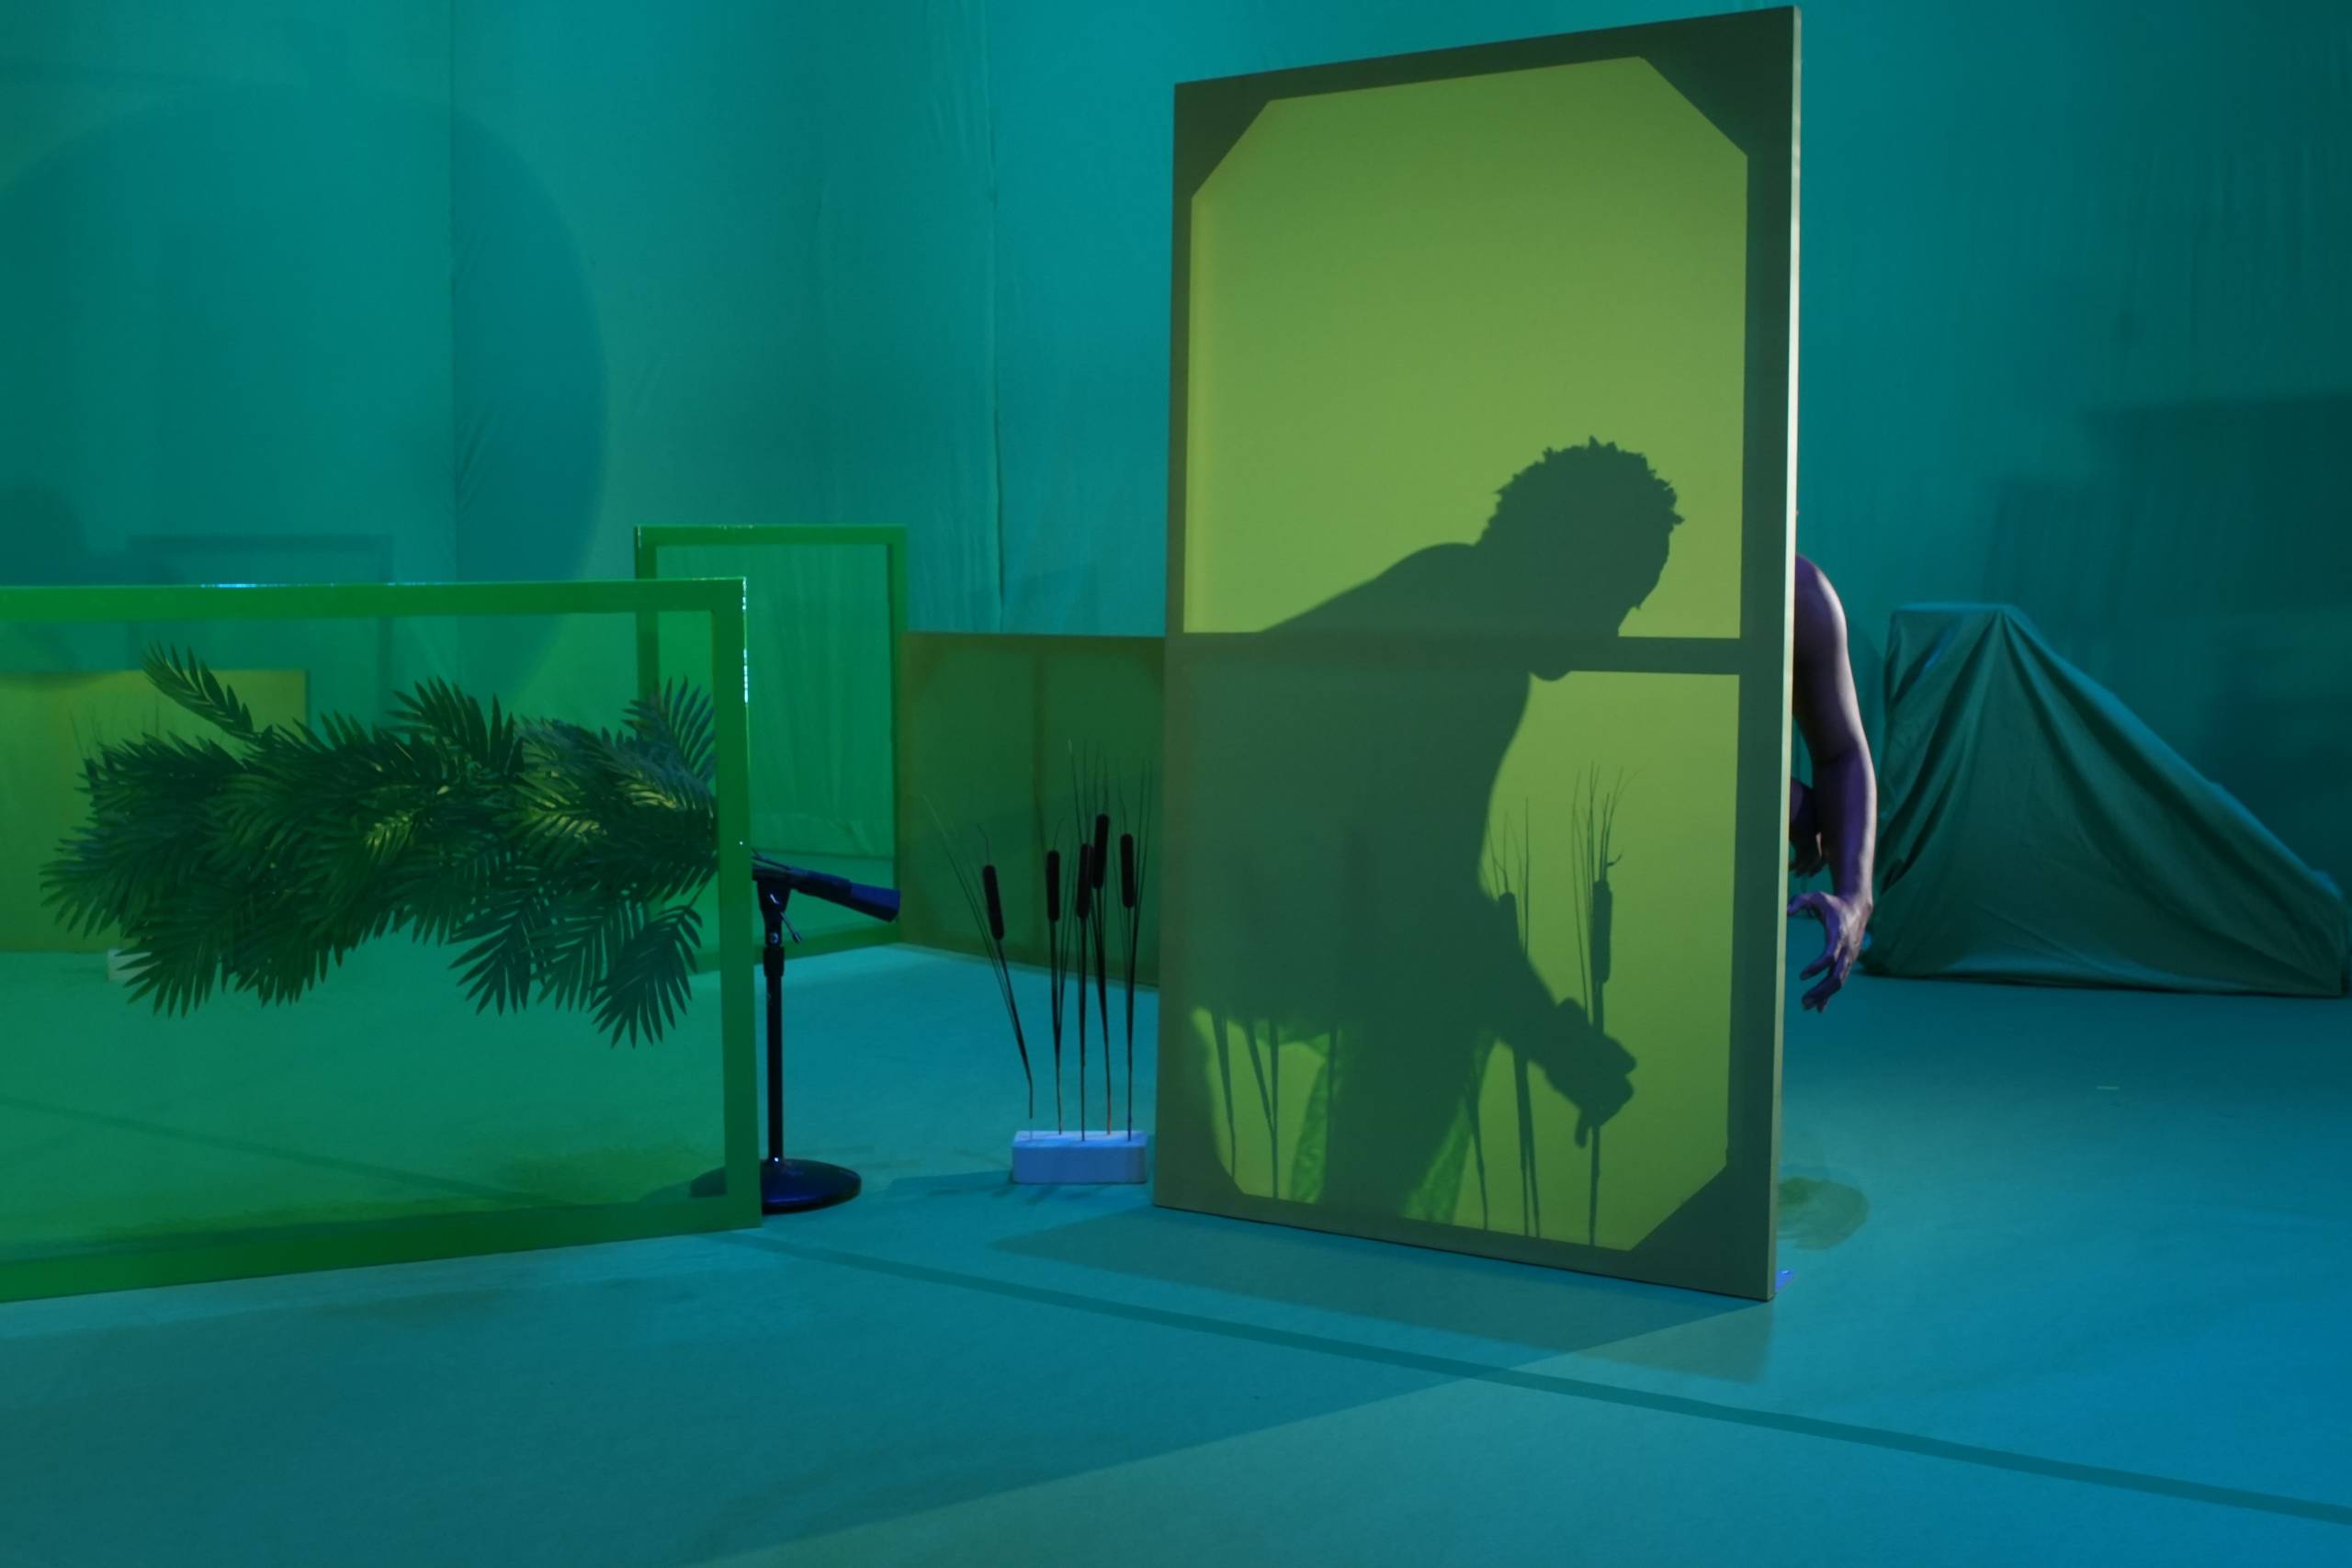 A performer in [siccer] crouches behind a screen, their shadow projected against it.